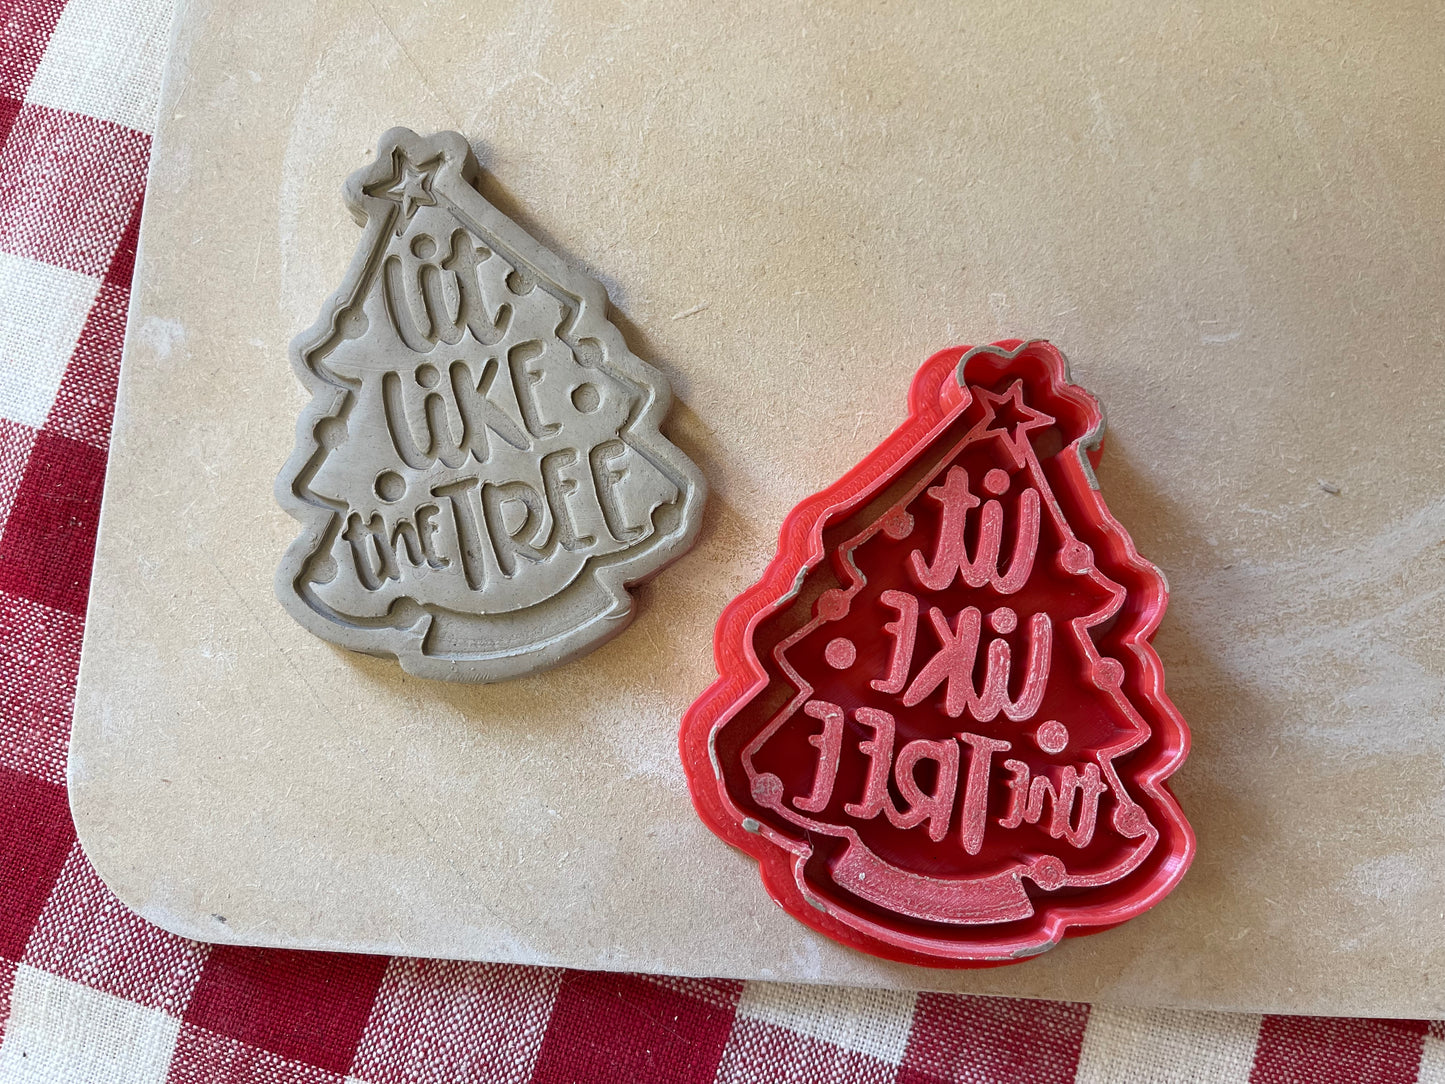 "Lit like the Tree" or plain Christmas tree pottery stamp w/ optional ornament cutter - Pottery Tool, plastic 3d printed, multiple sizes available